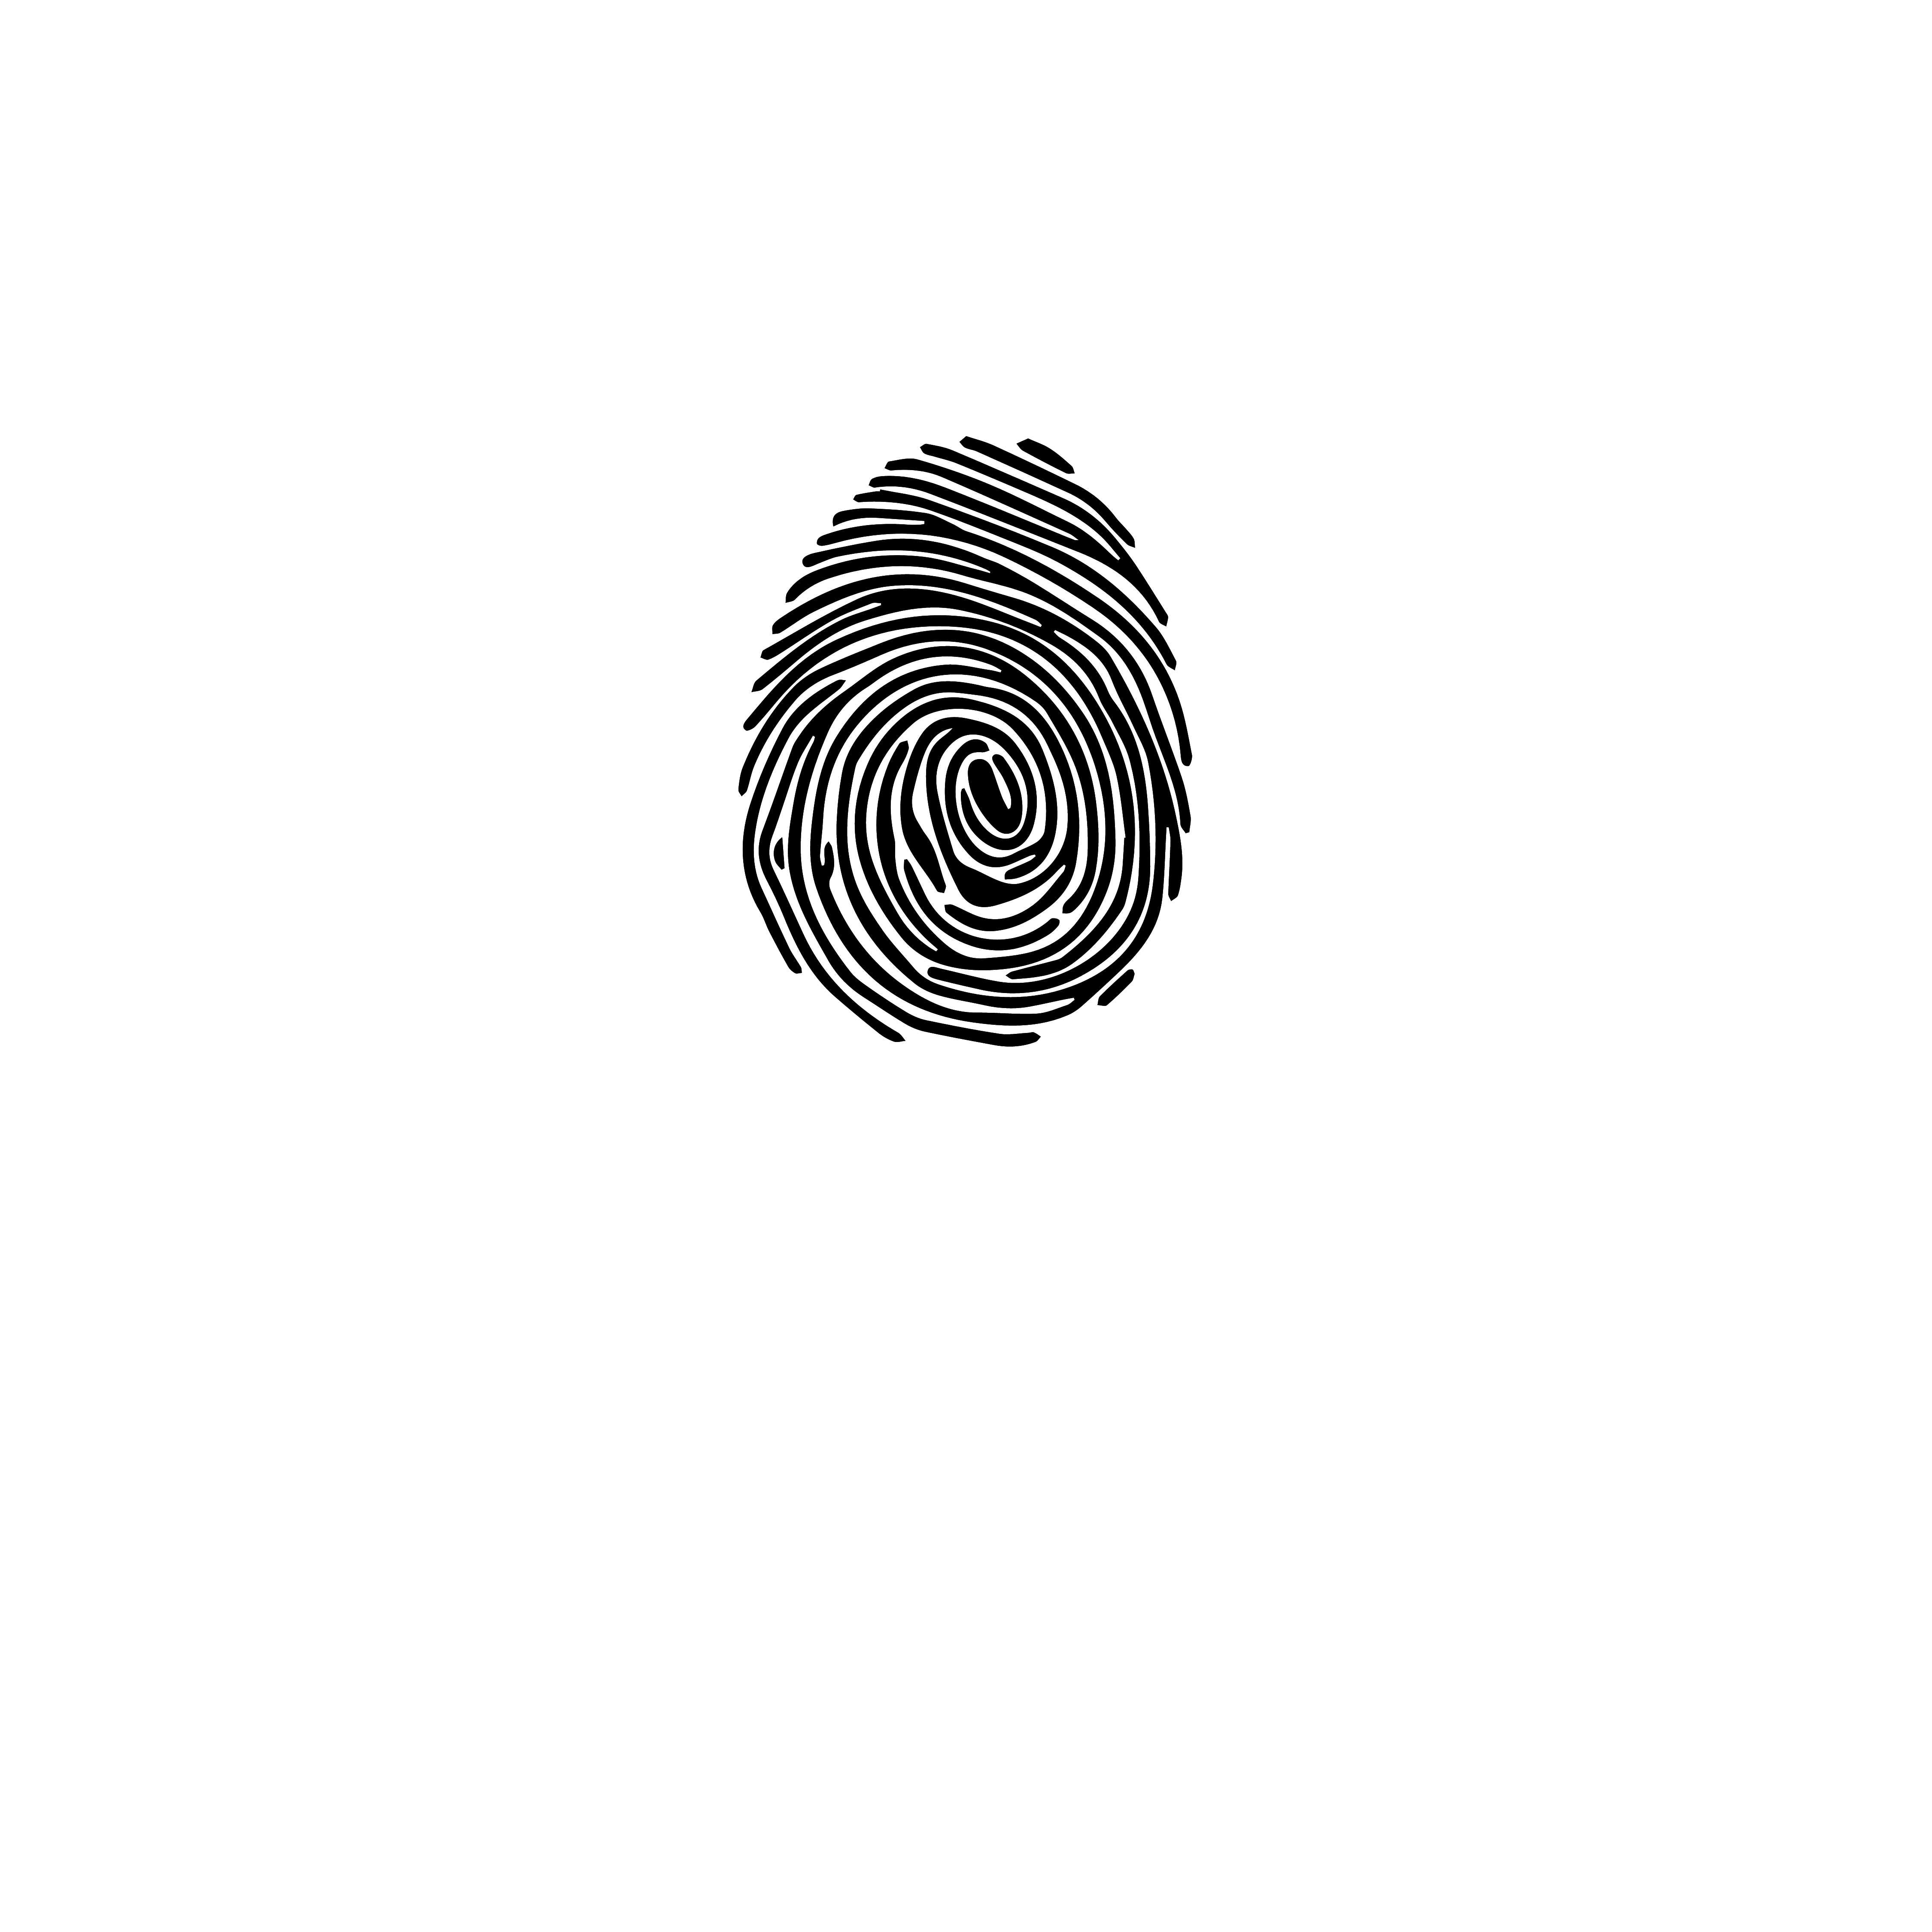 proffapt's forum for cybernity